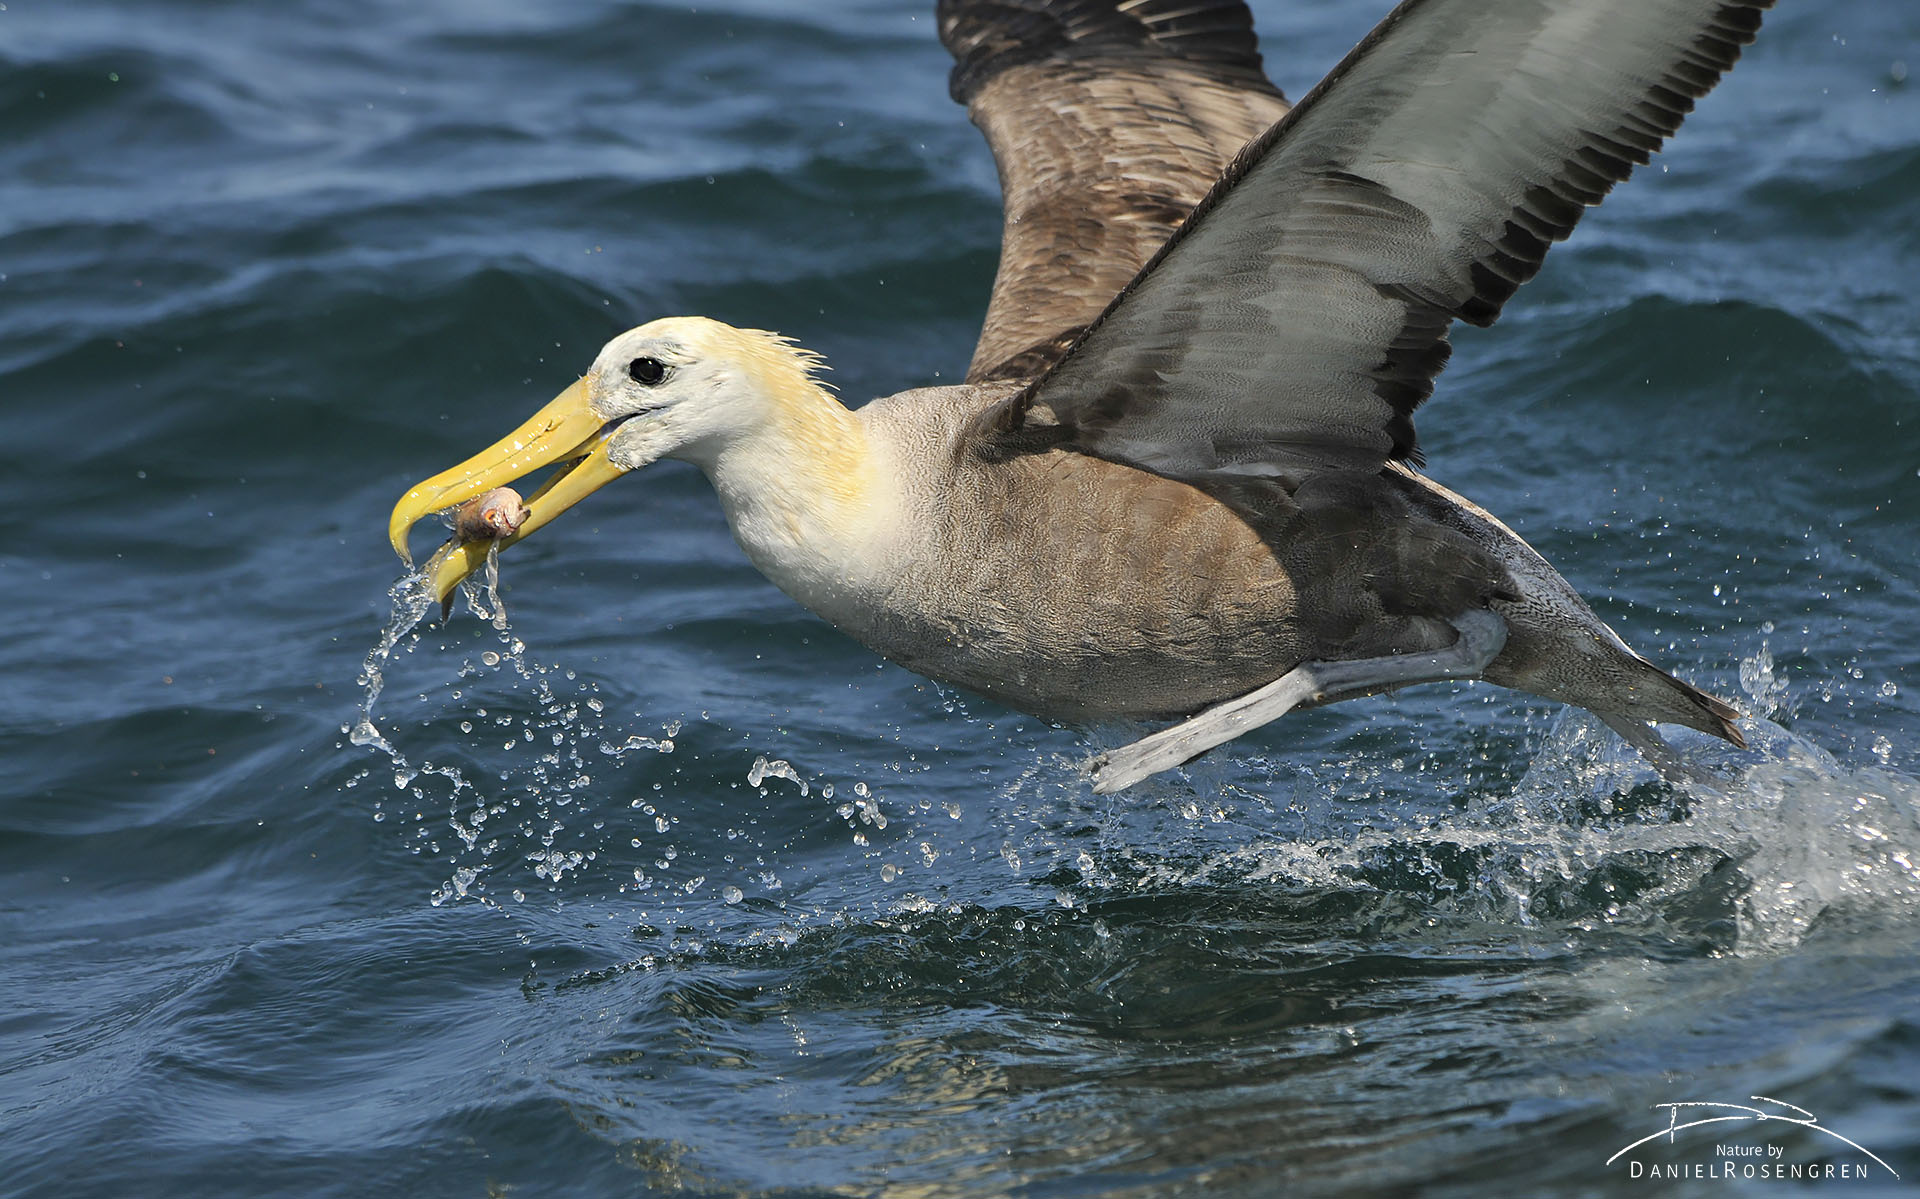 The critically endangered Waved albatross taking off by running on the surface to gain enough speed. © Daniel Rosengren